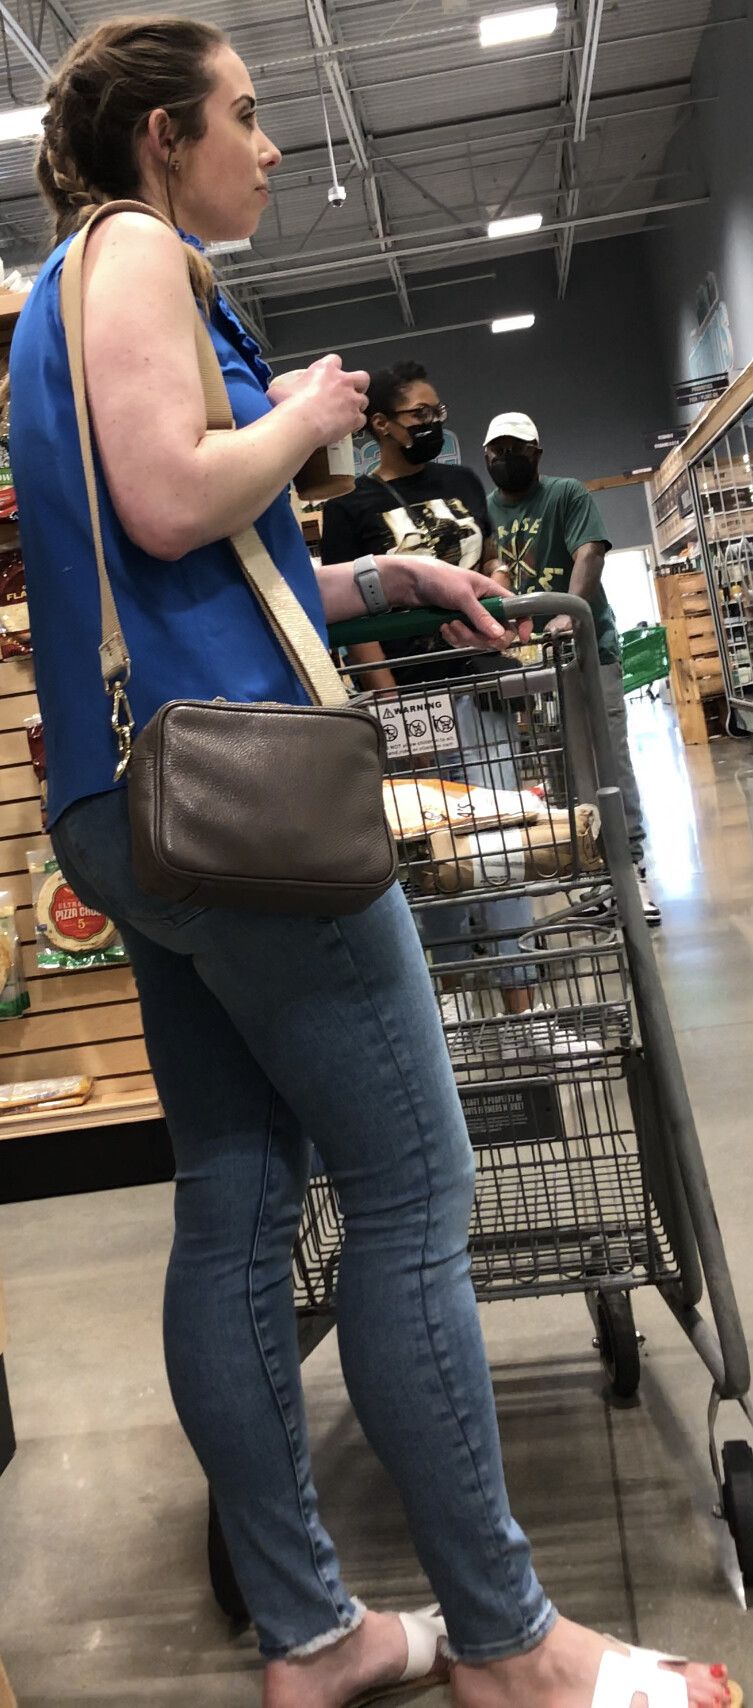 Thicc beauty in jeans at the market - Tight Jeans - Forum